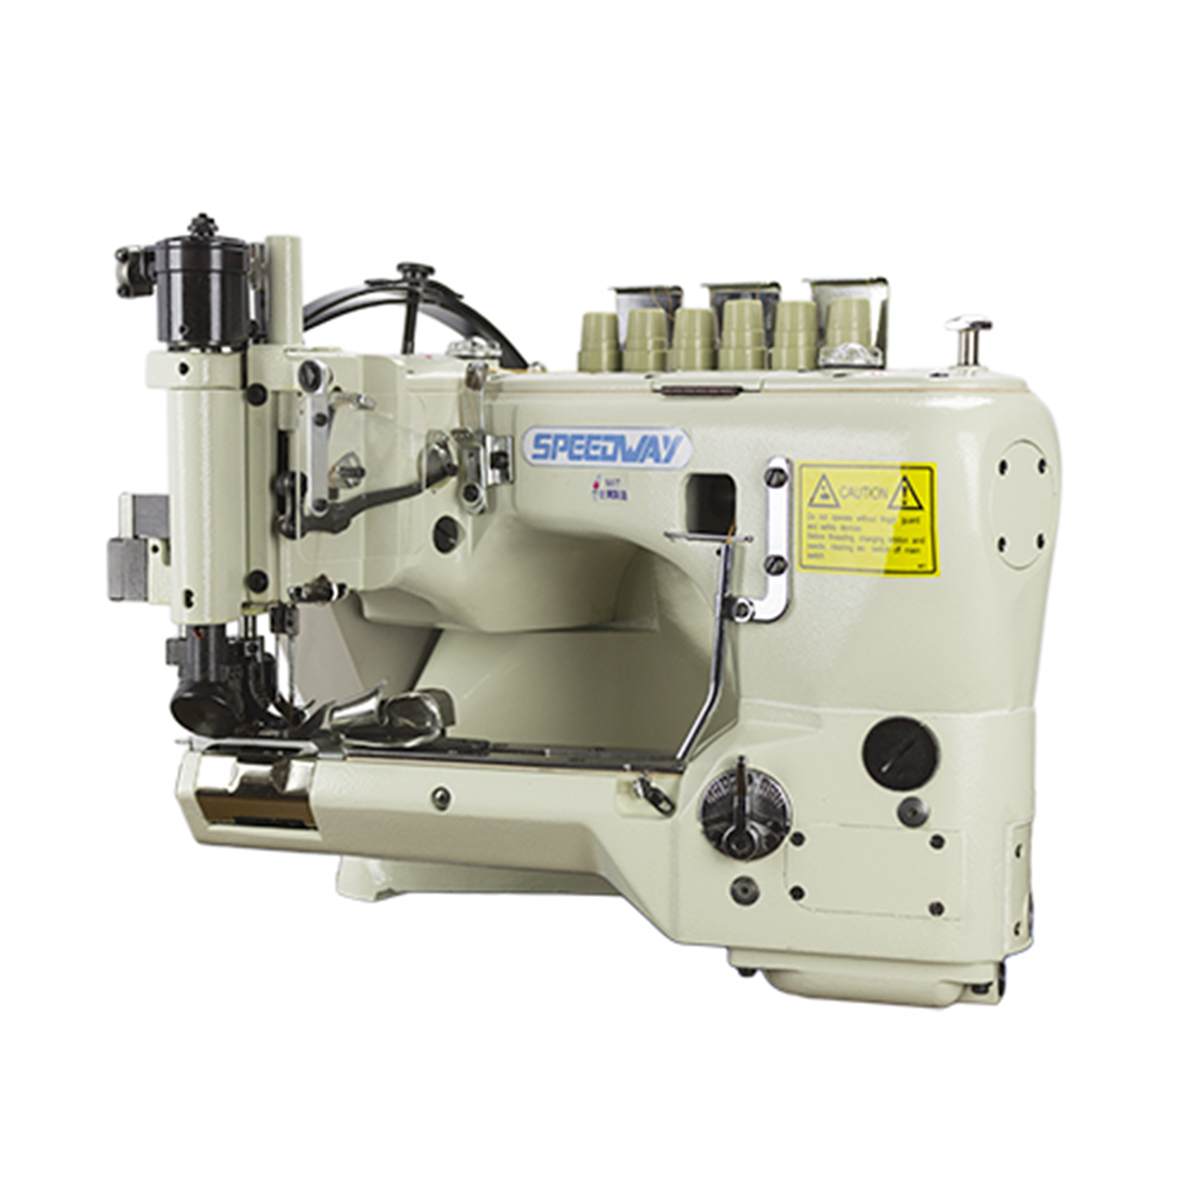 SPEEDWAY SW35800DNU 3 Needle Feed of the Arm Chainstitch For Jeans with Differential Industrial Sewing Machine Assembled with Servo Motor, Table and Stand Included